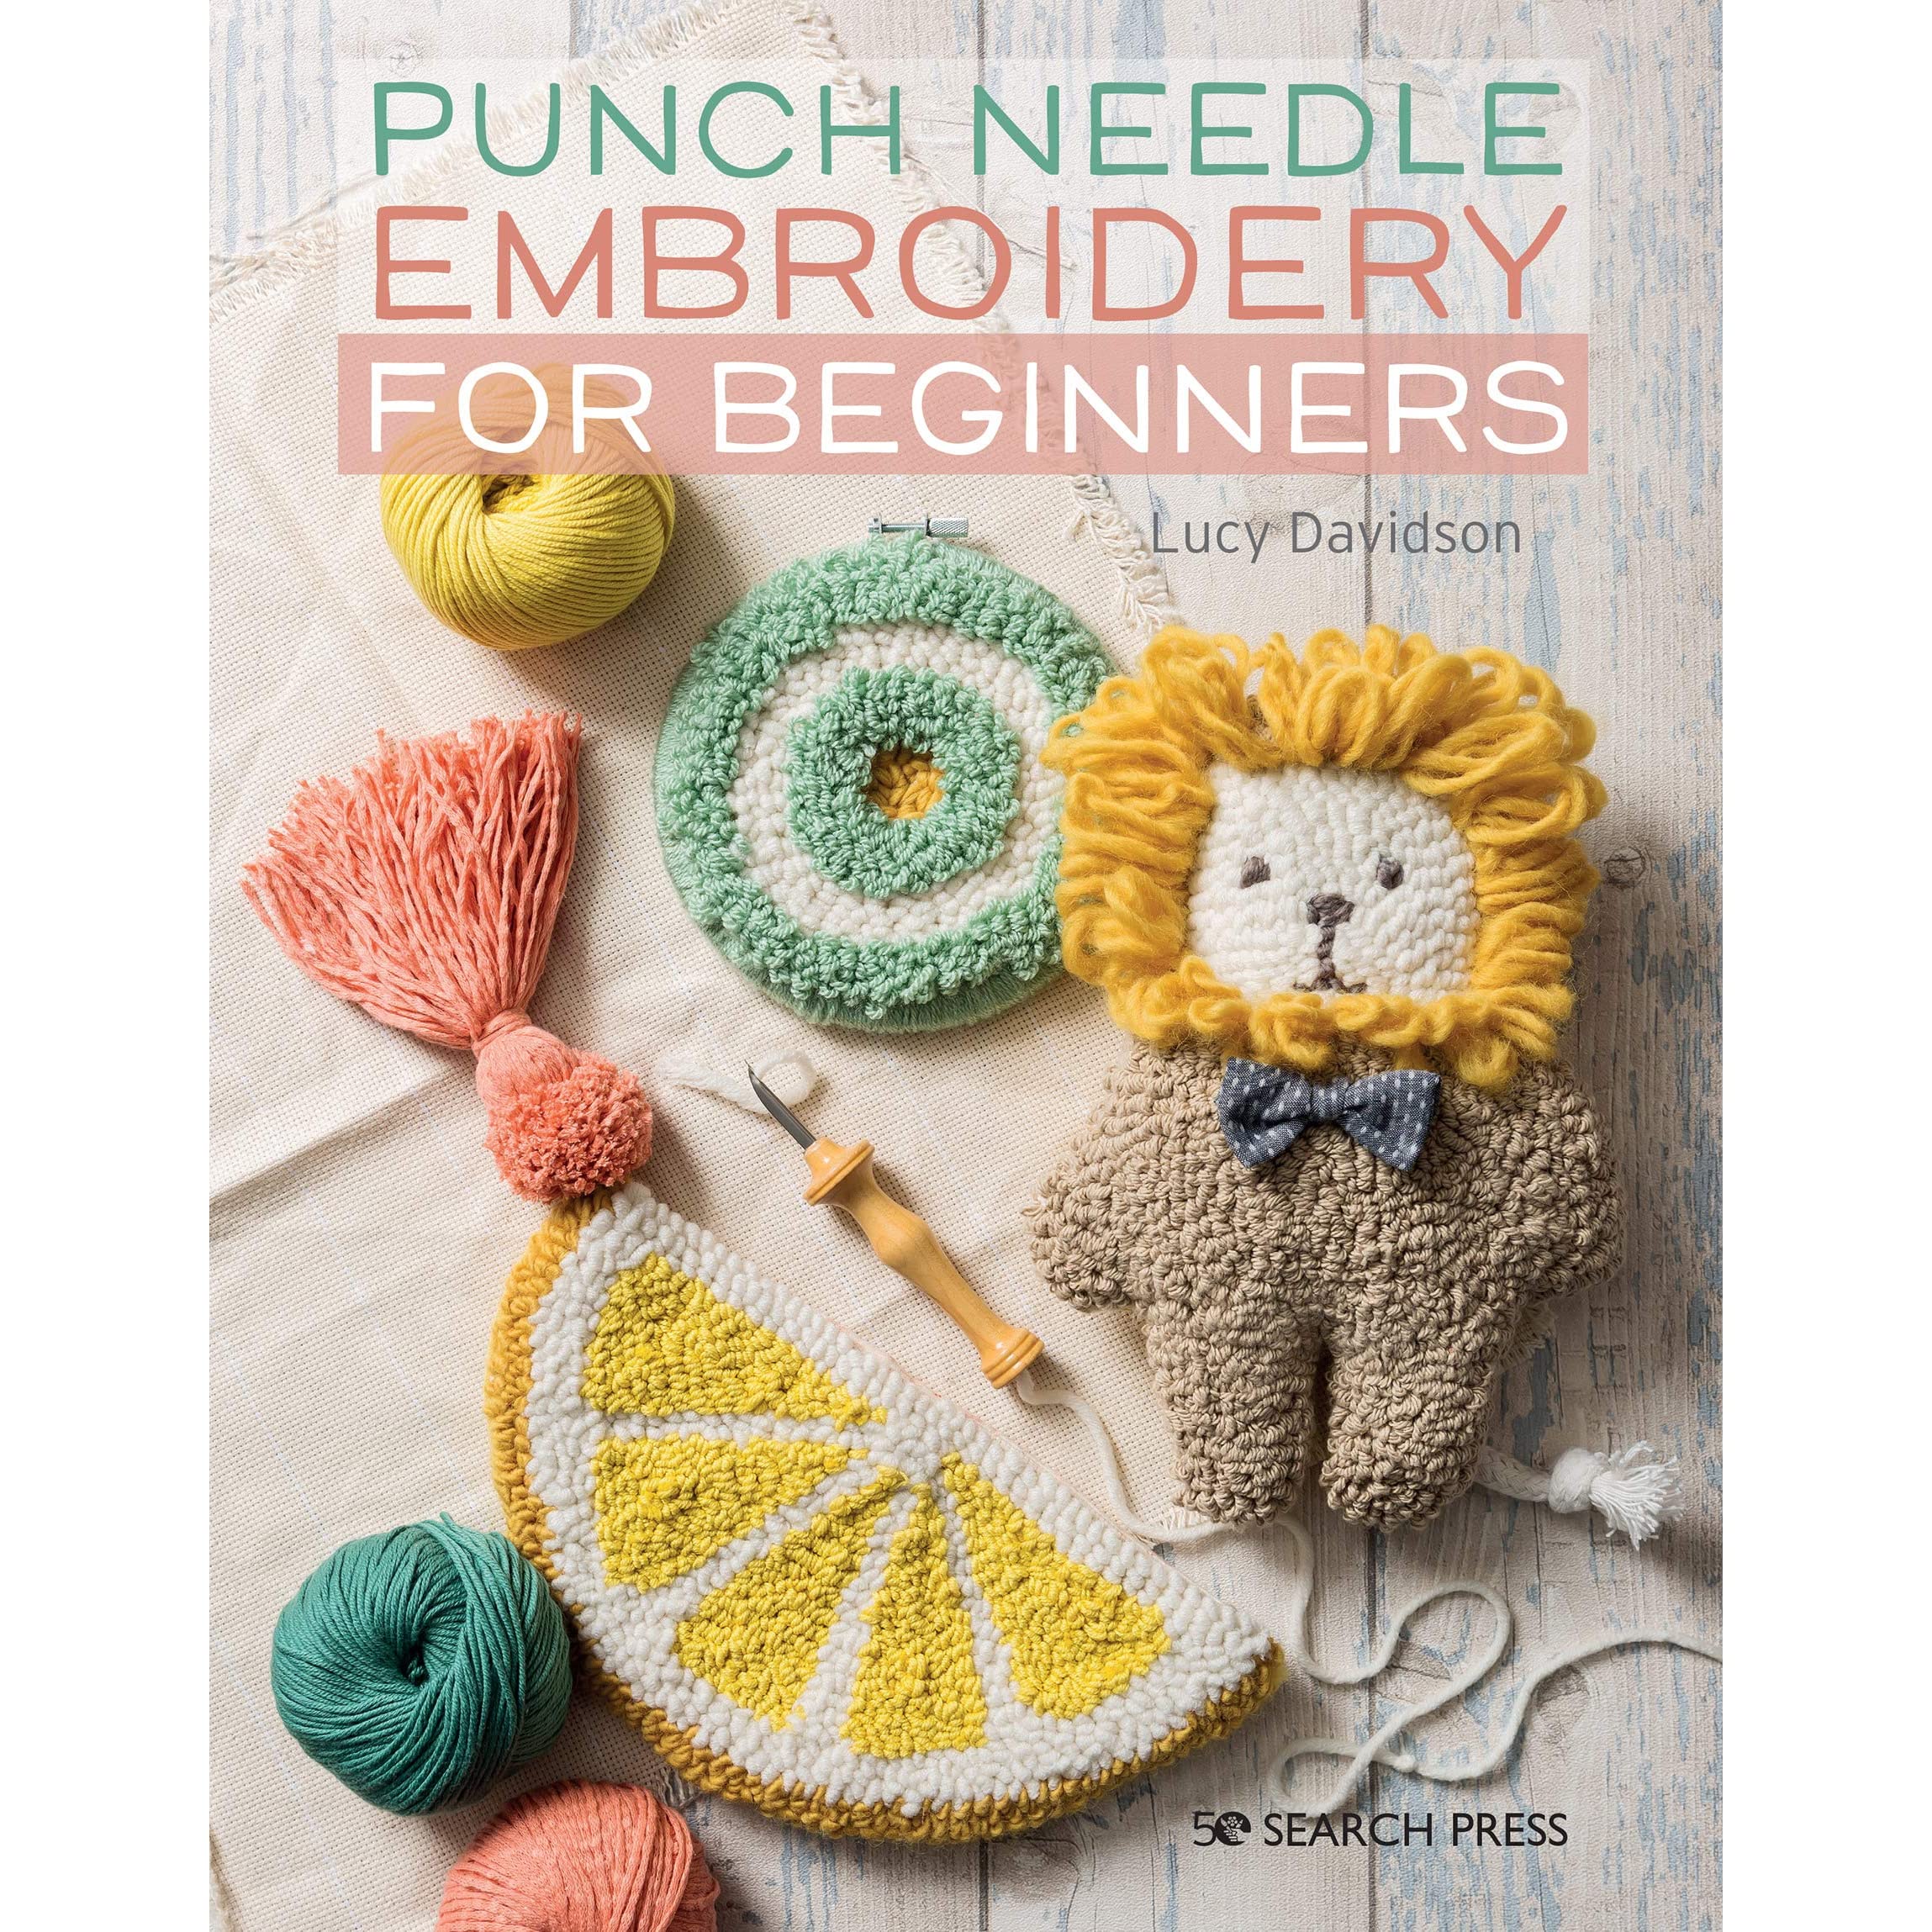 Punch Needle Embroidery for Beginners by Lucy Davidson